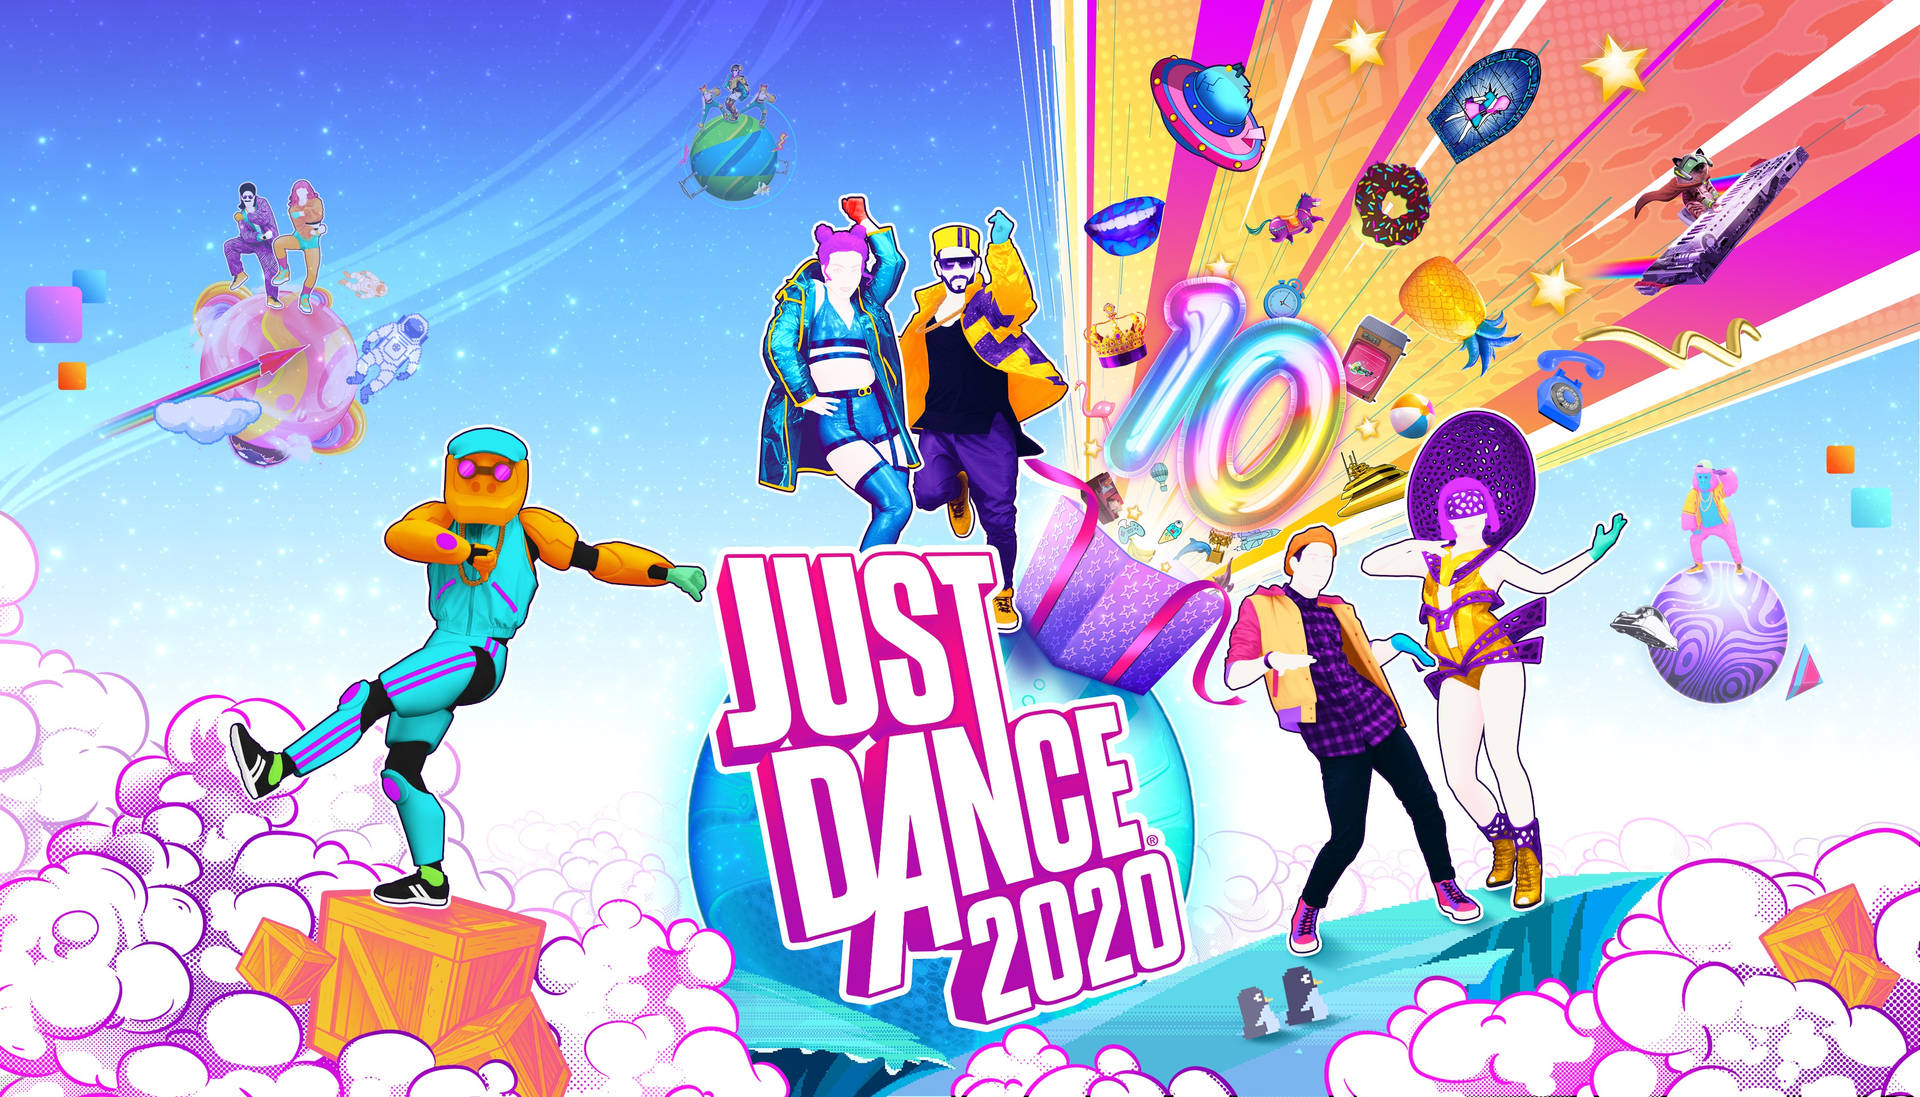 Just Dance 2020 Poster